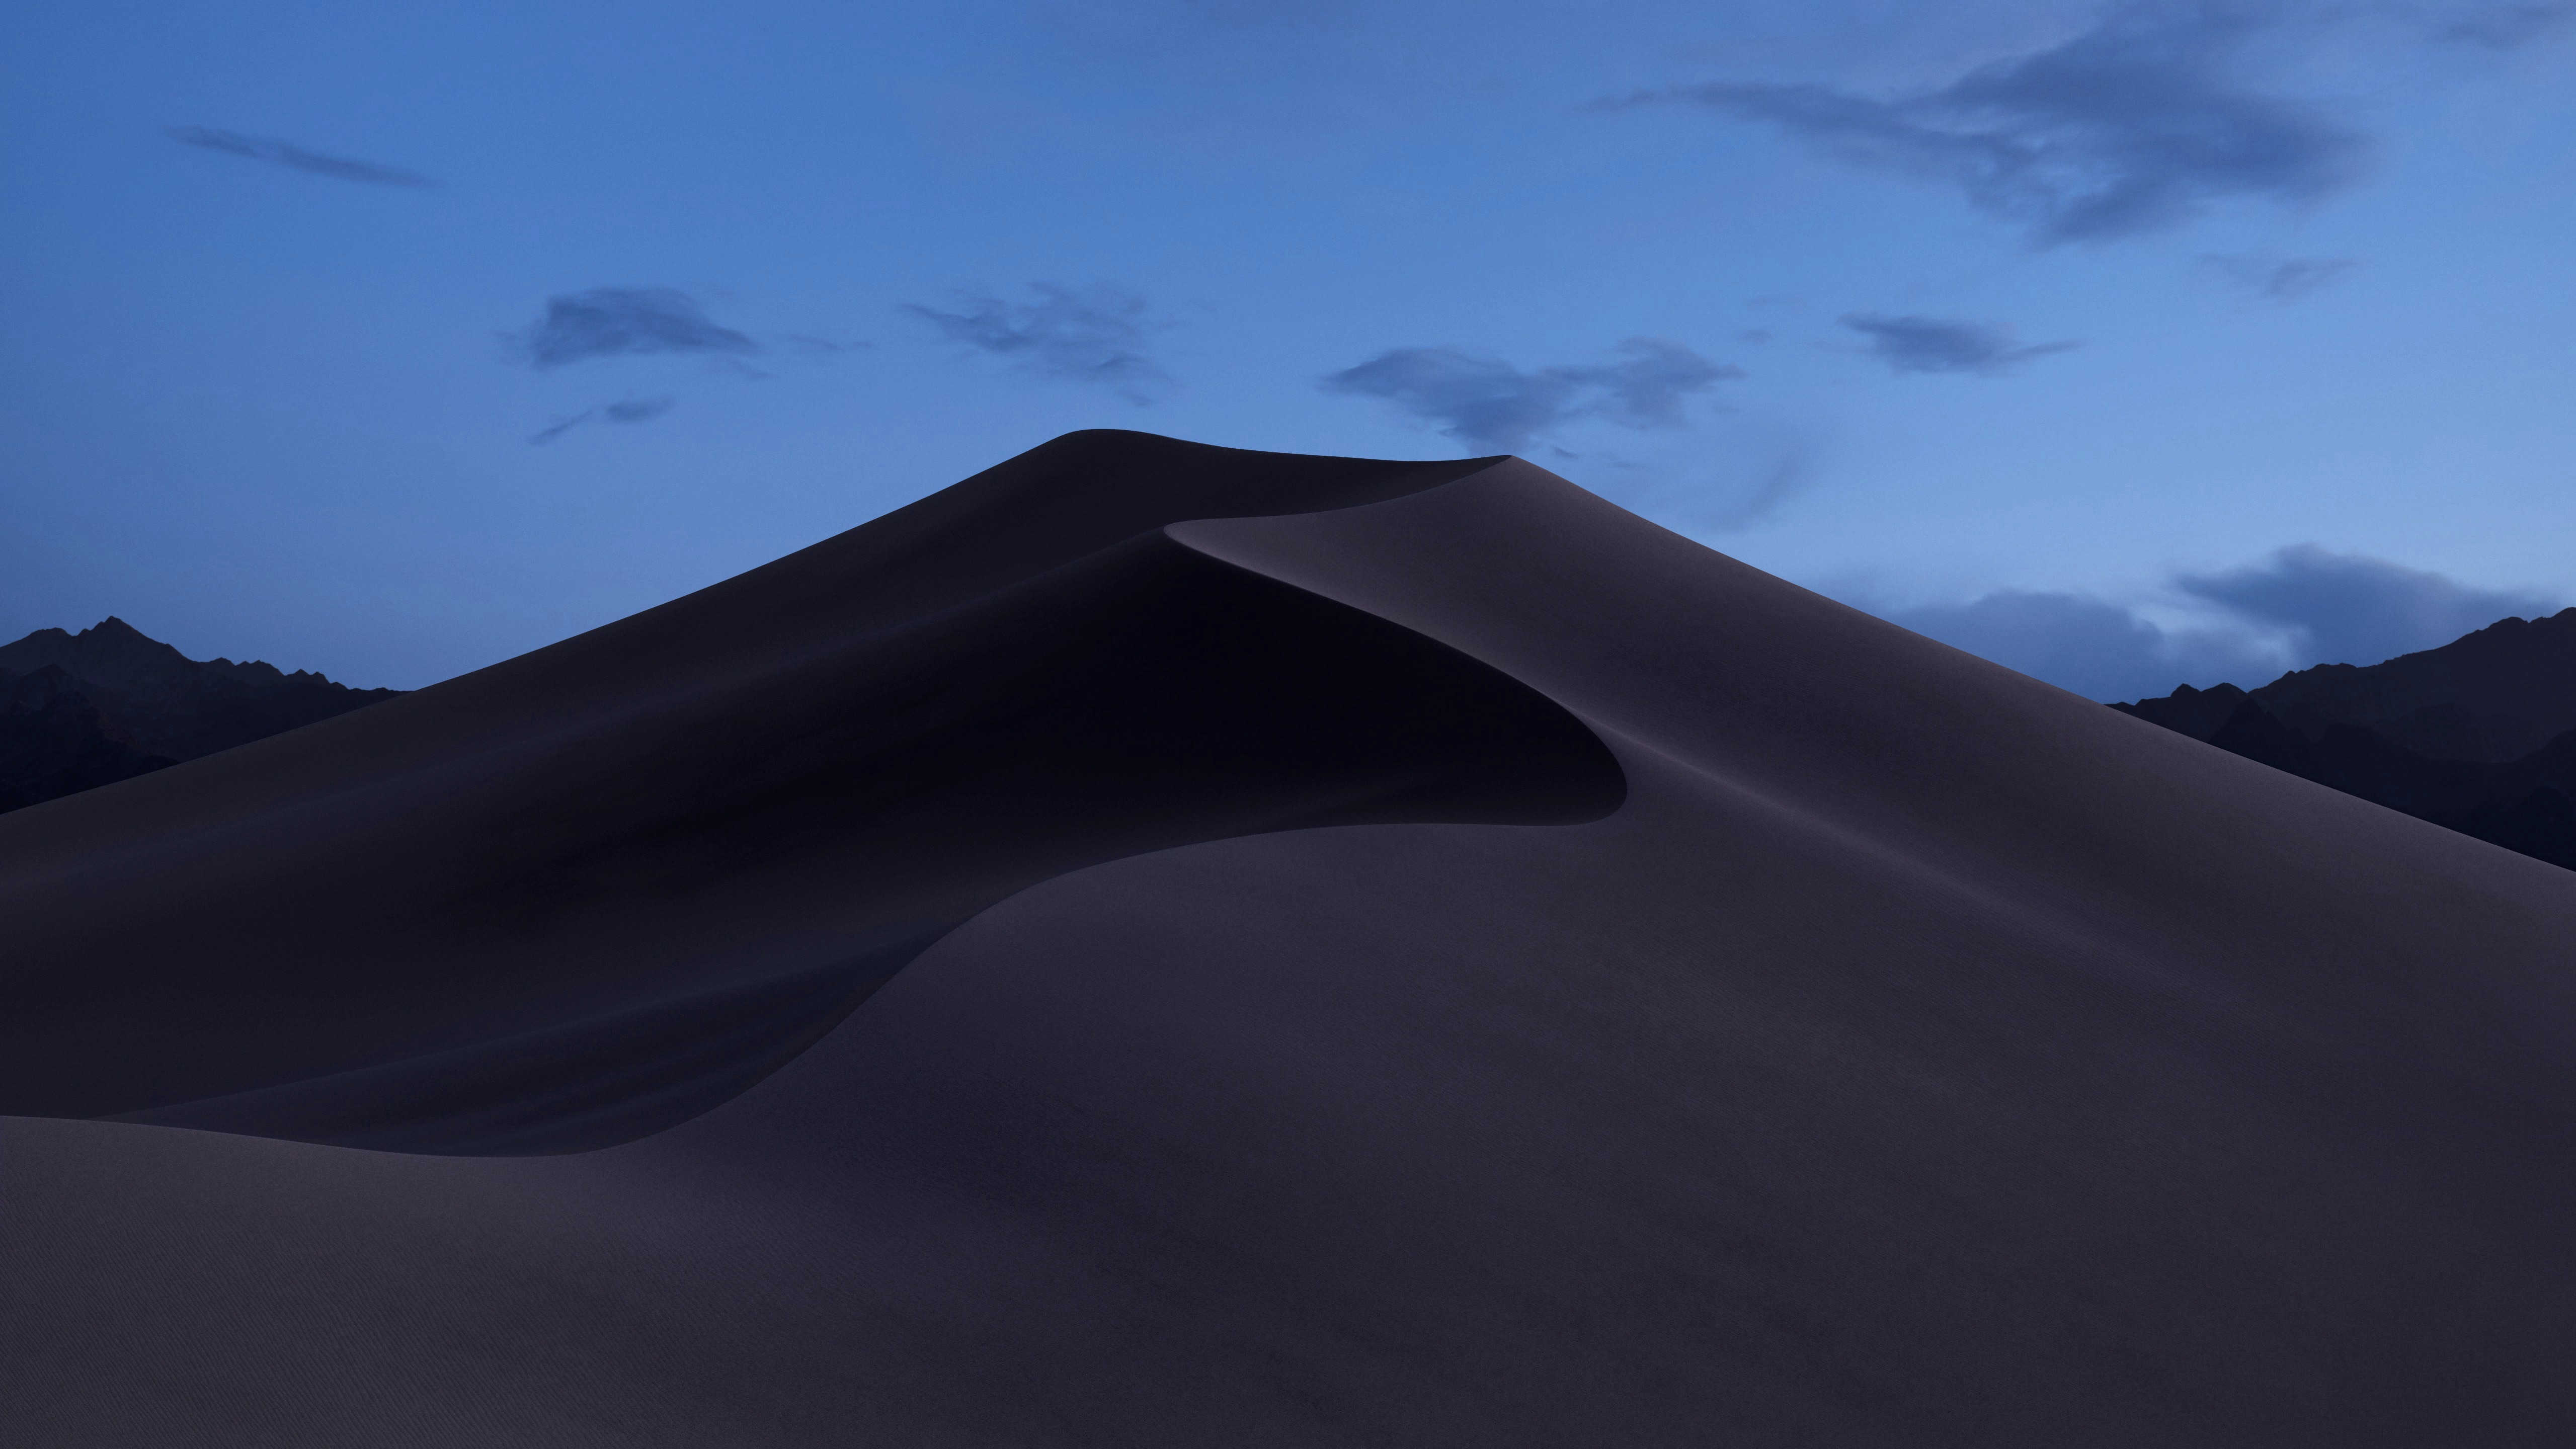 How To Install The macOS Mojave Dynamic Wallpaper Ahead Of